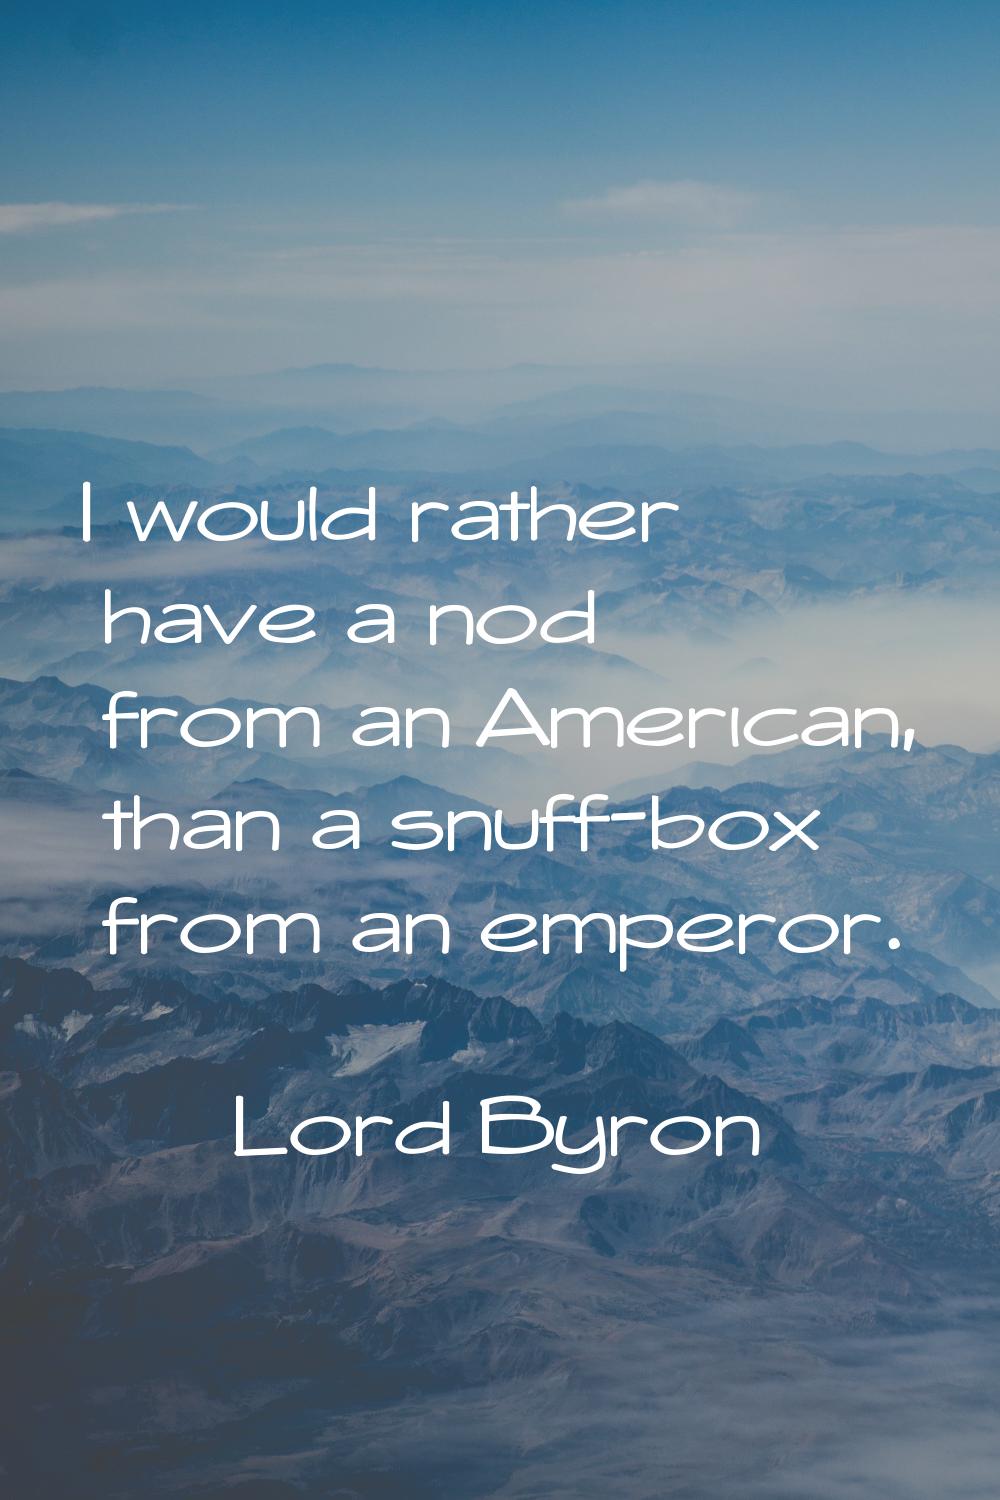 I would rather have a nod from an American, than a snuff-box from an emperor.